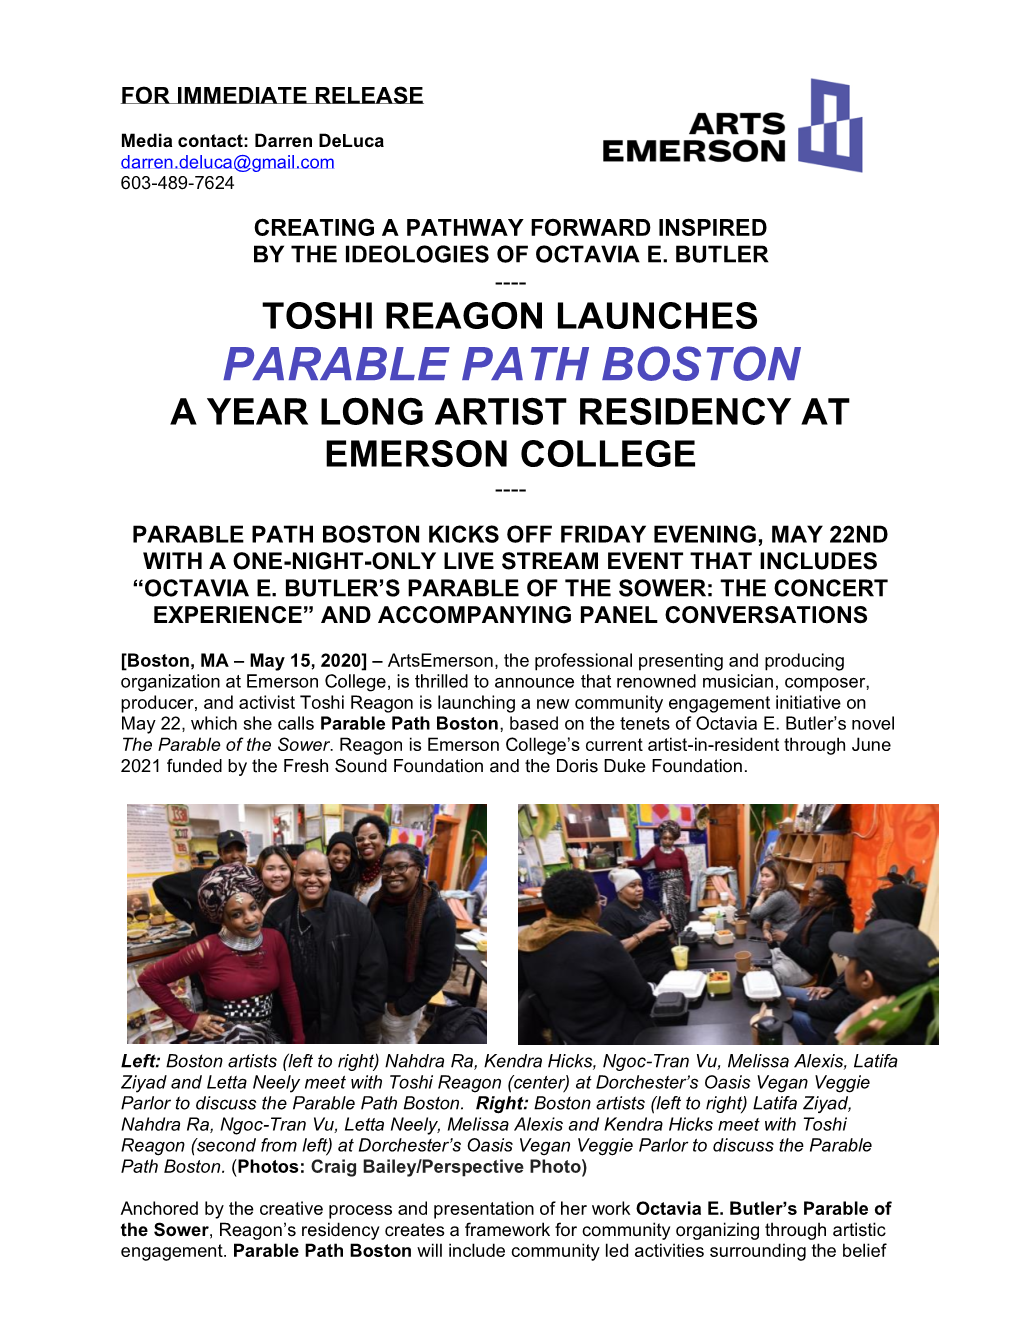 Parable Path Boston a Year Long Artist Residency at Emerson College